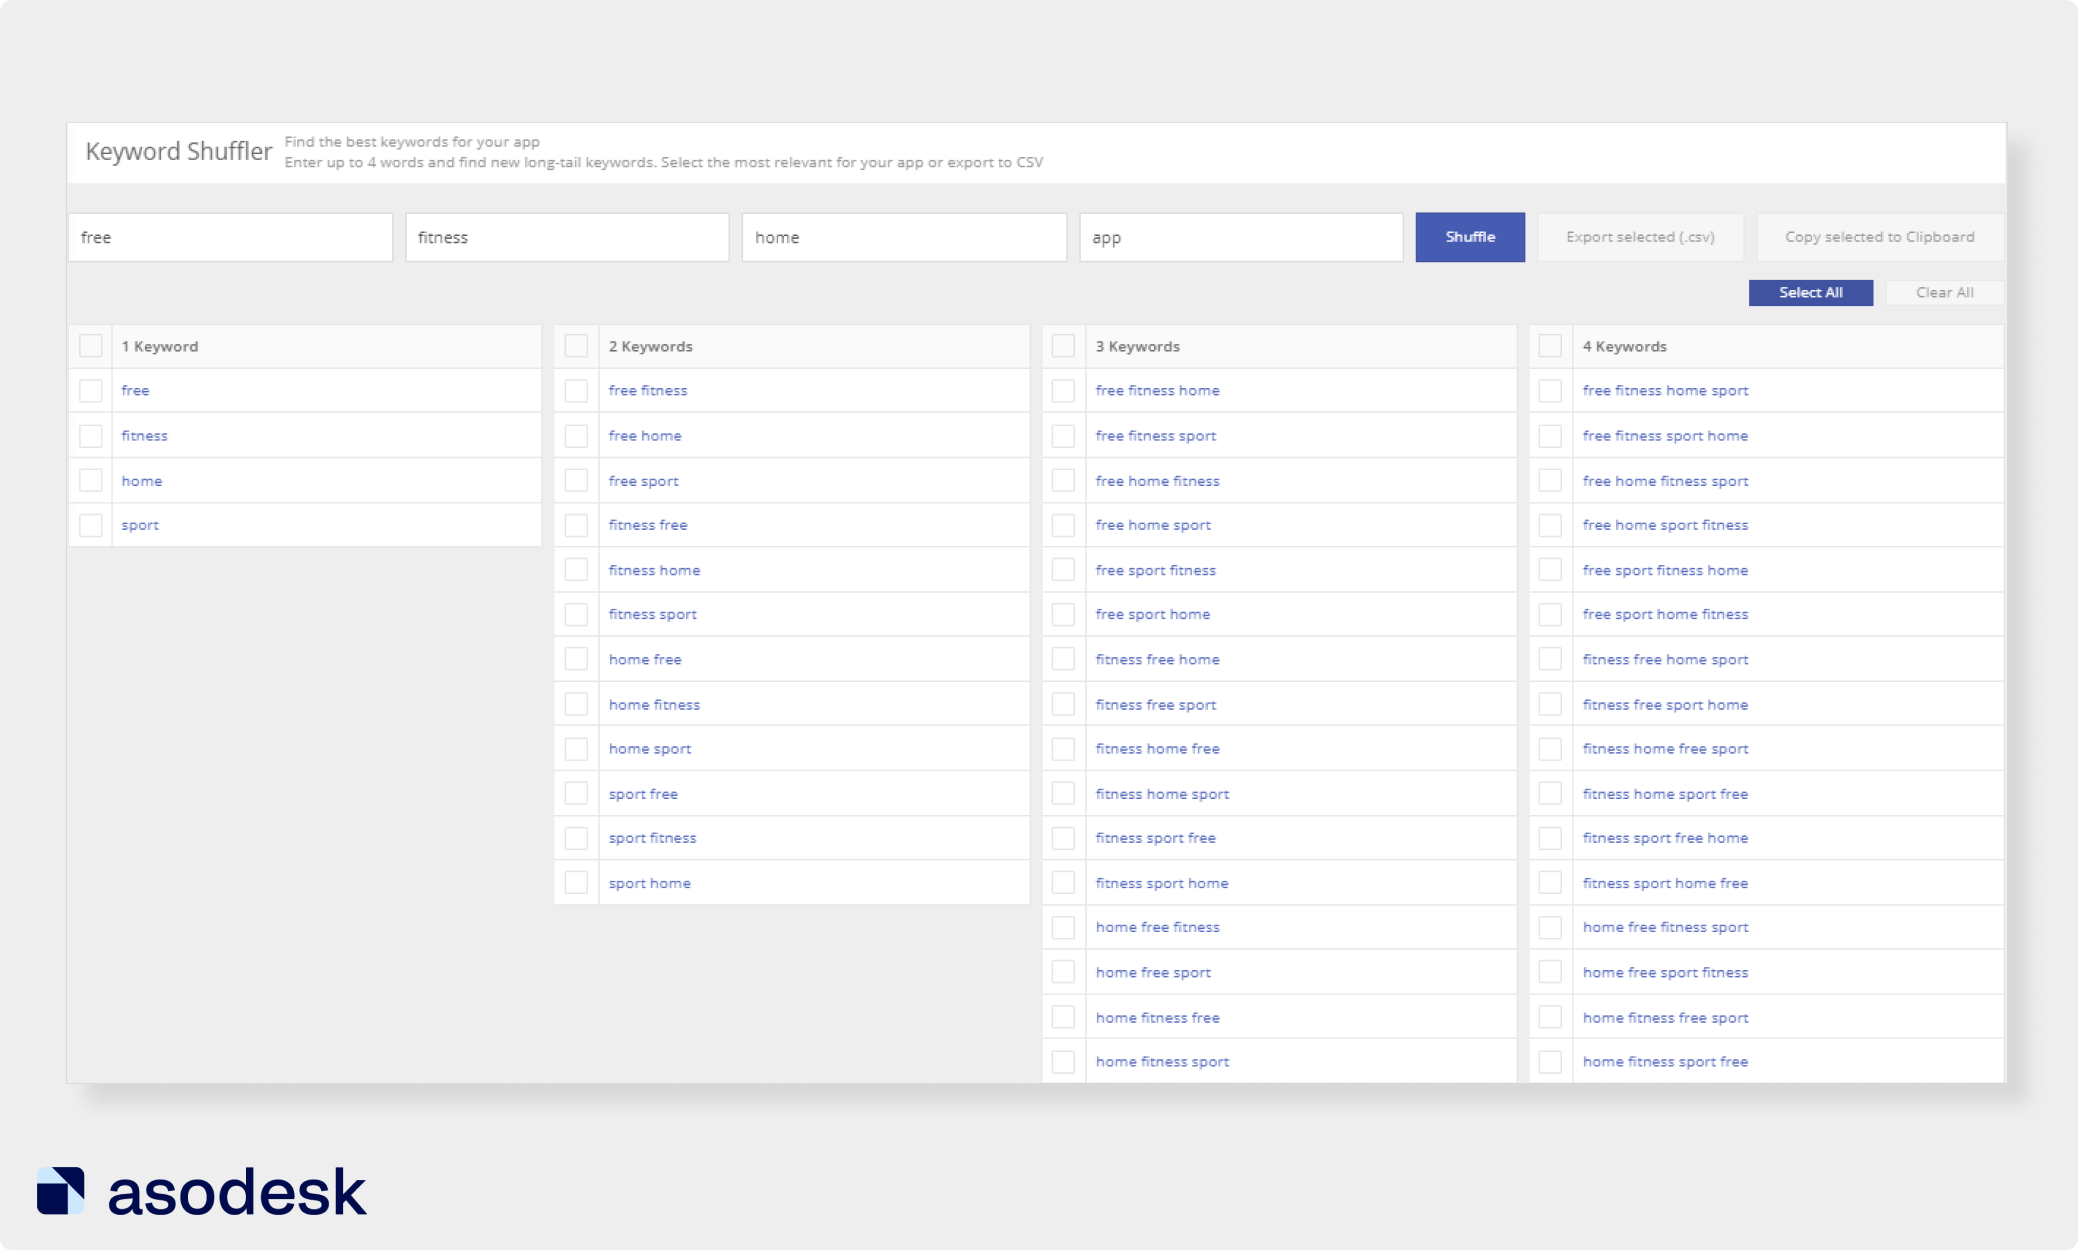 Keyword Shuffler in Asodesk helps you find different combinations of keywords